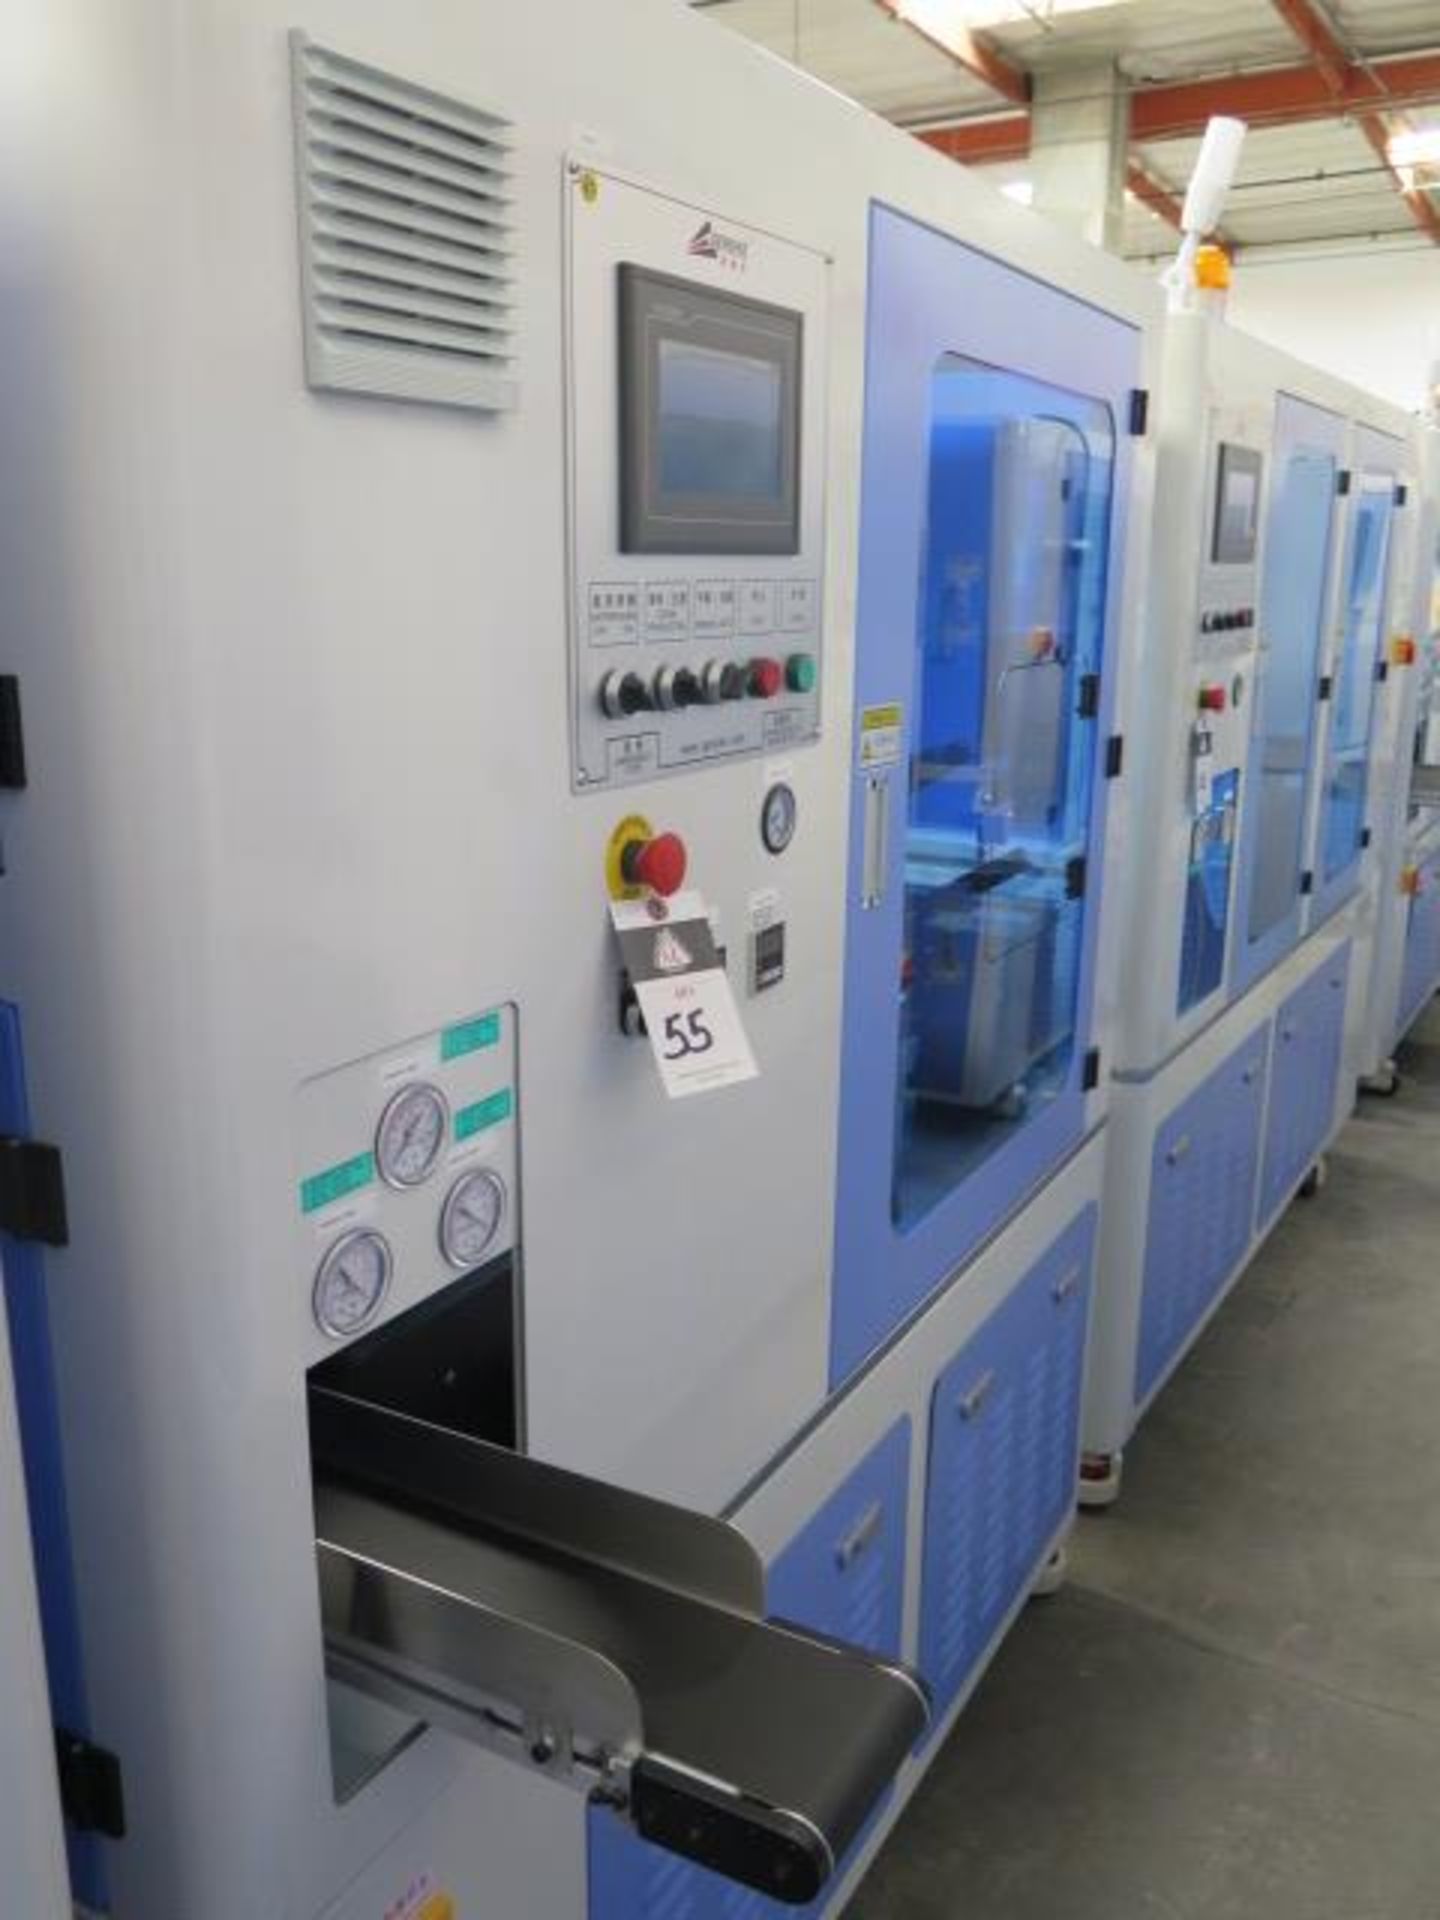 2/2021 Gereke mdl. GRK-TWO1 Cassette Assembly and Packaging Line s/n GRK20210227047, SOLD AS IS - Bild 3 aus 30